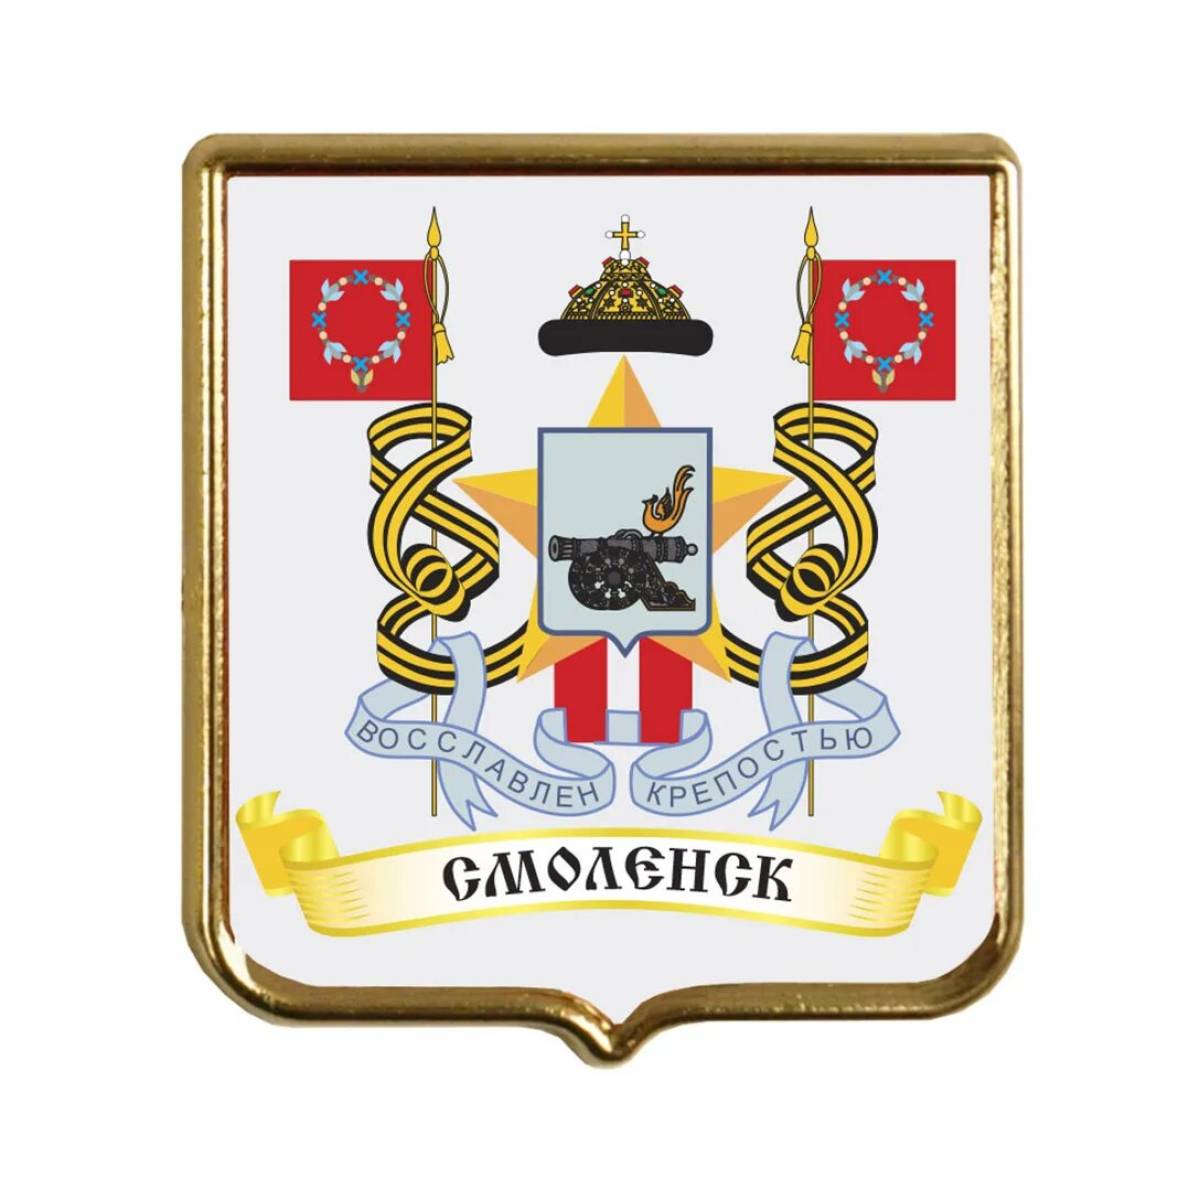 Coat of arms of Smolensk #5